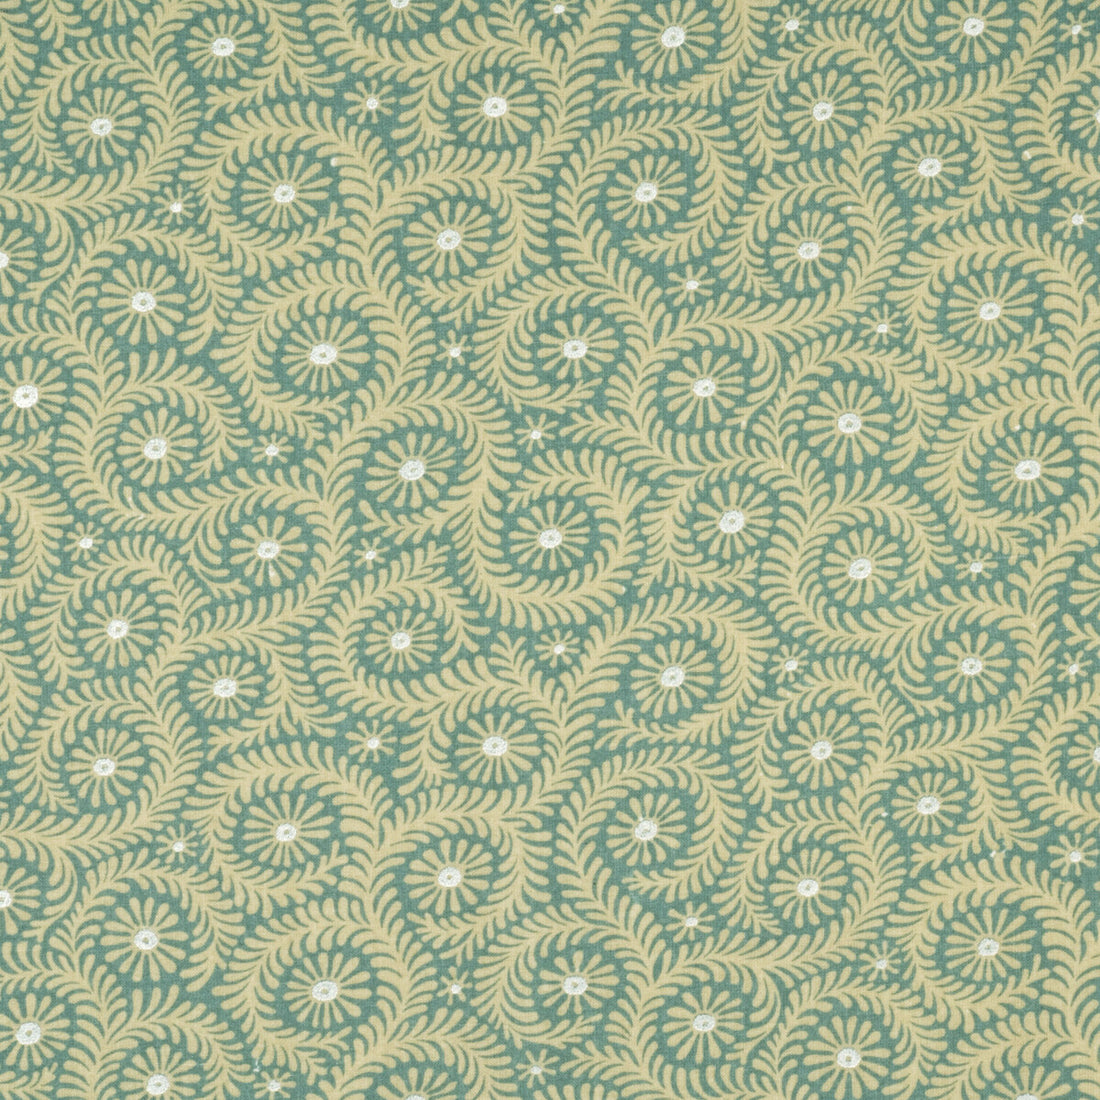 Foxy fabric in aqua color - pattern PP50281.10.0 - by Baker Lifestyle in the Foxwood collection